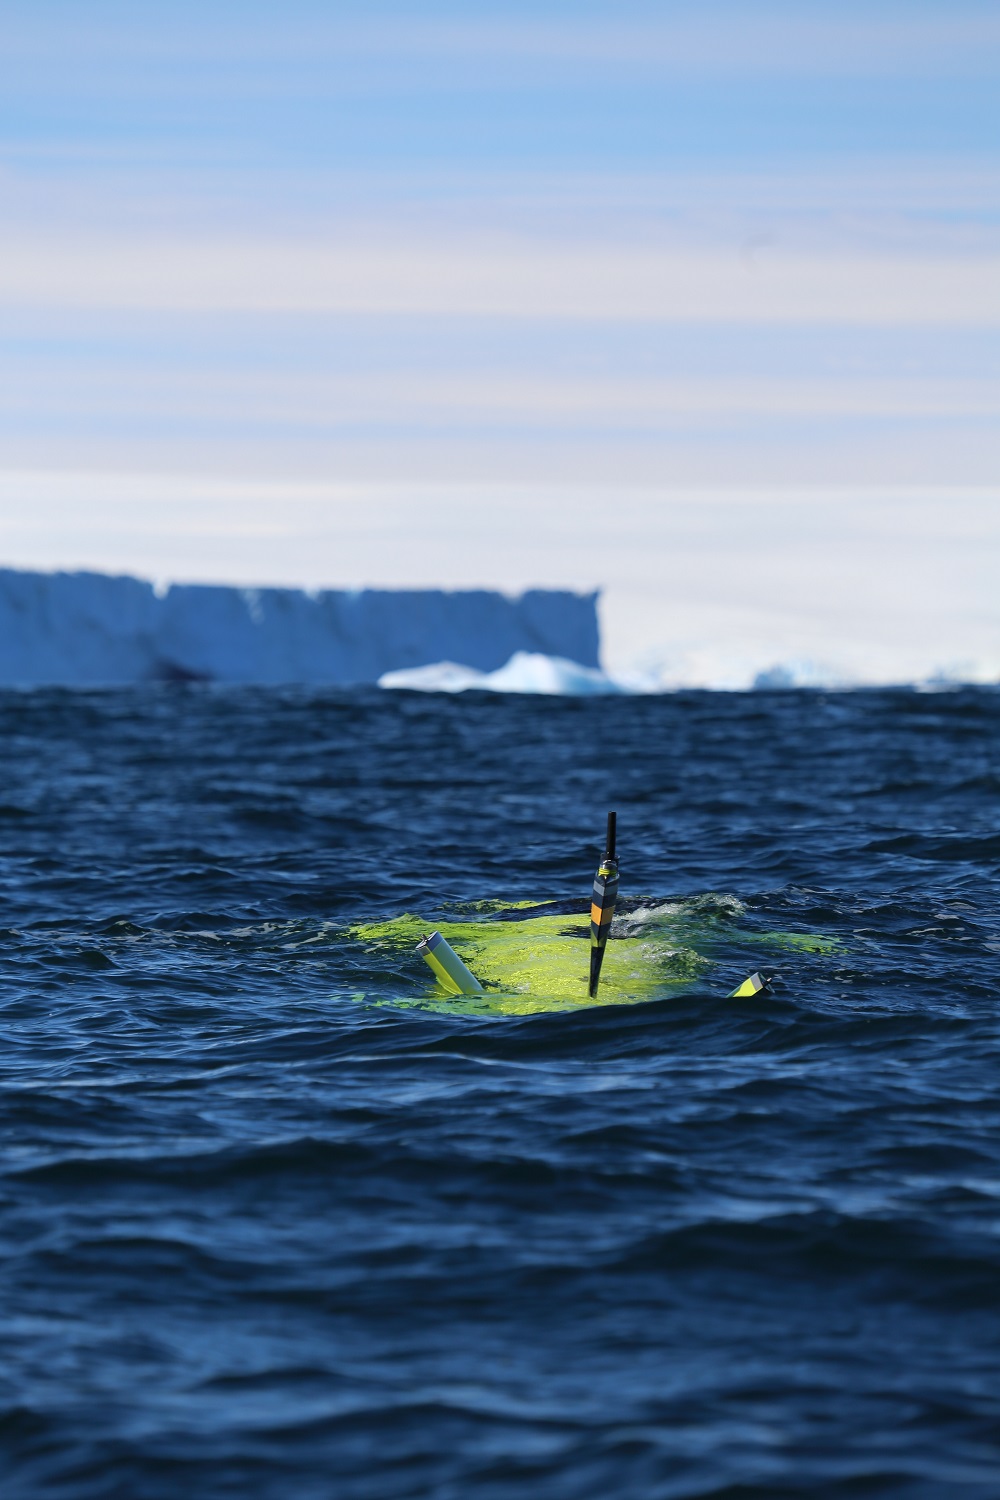 Thumbnail for First results from AUV mission reveal secrets of the Sørsdal ice shelf - Australian Maritime College